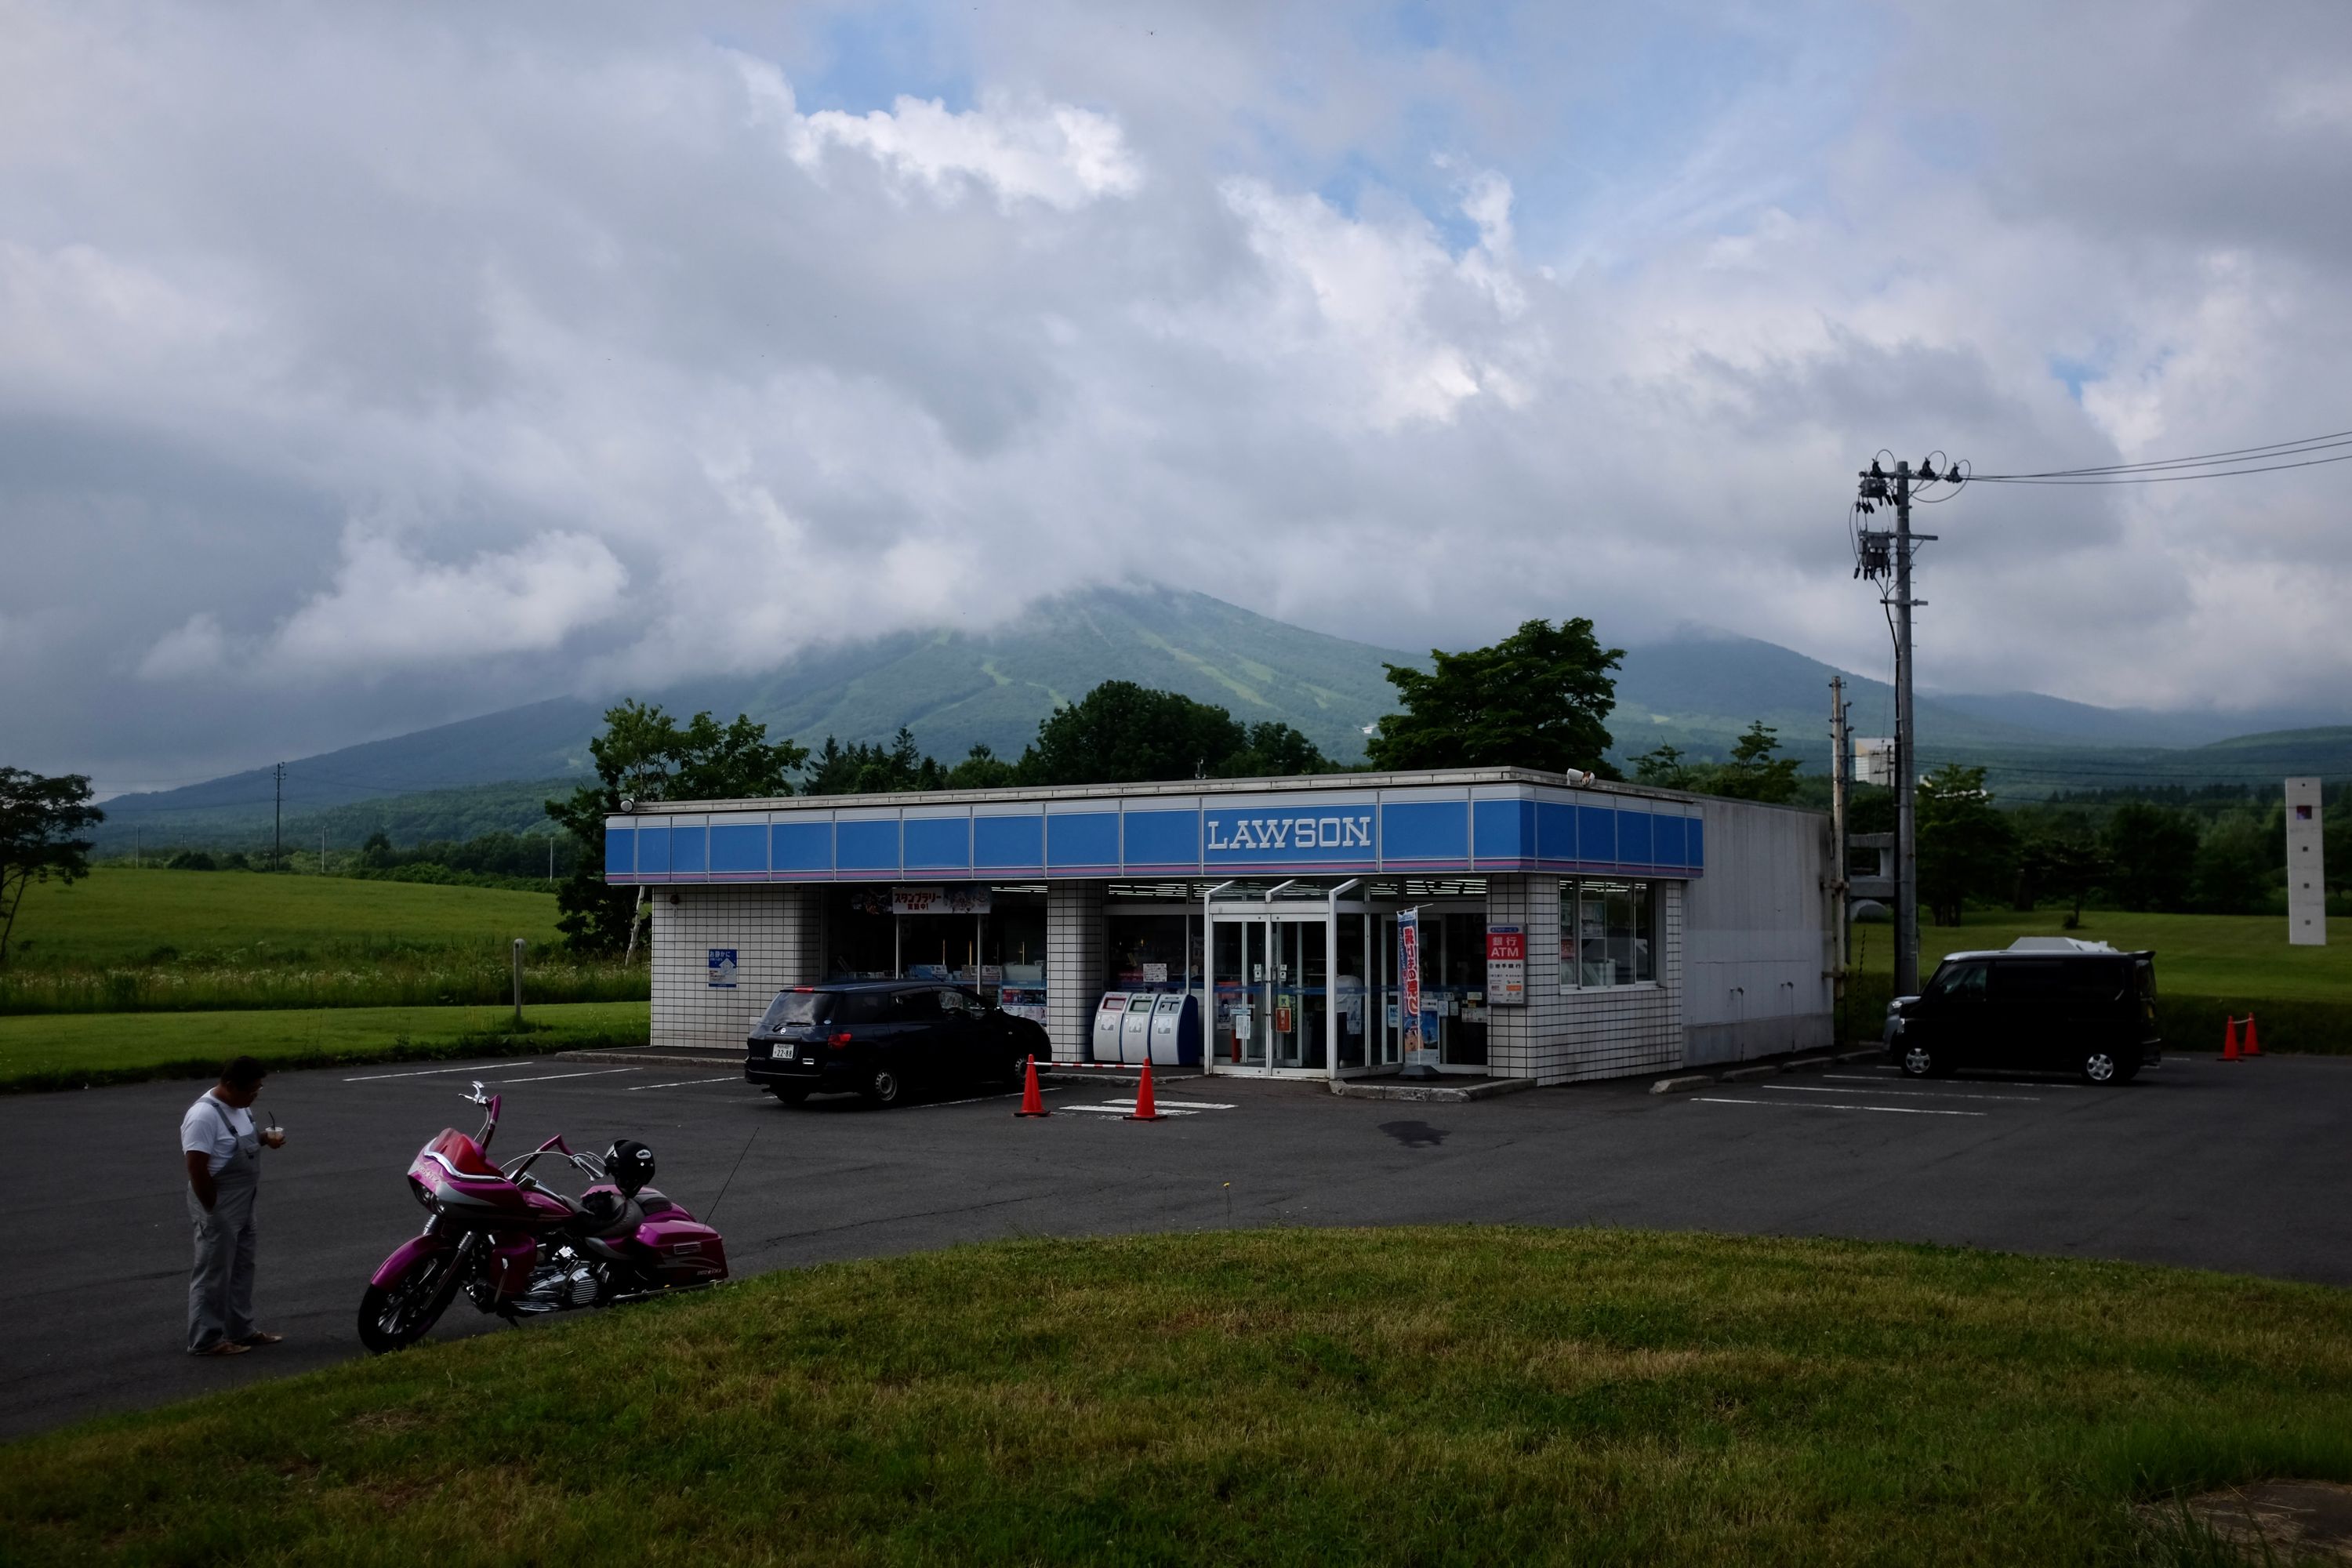 A Lawson convenience store on a cloudy day, with a forested mountain on the horizon.